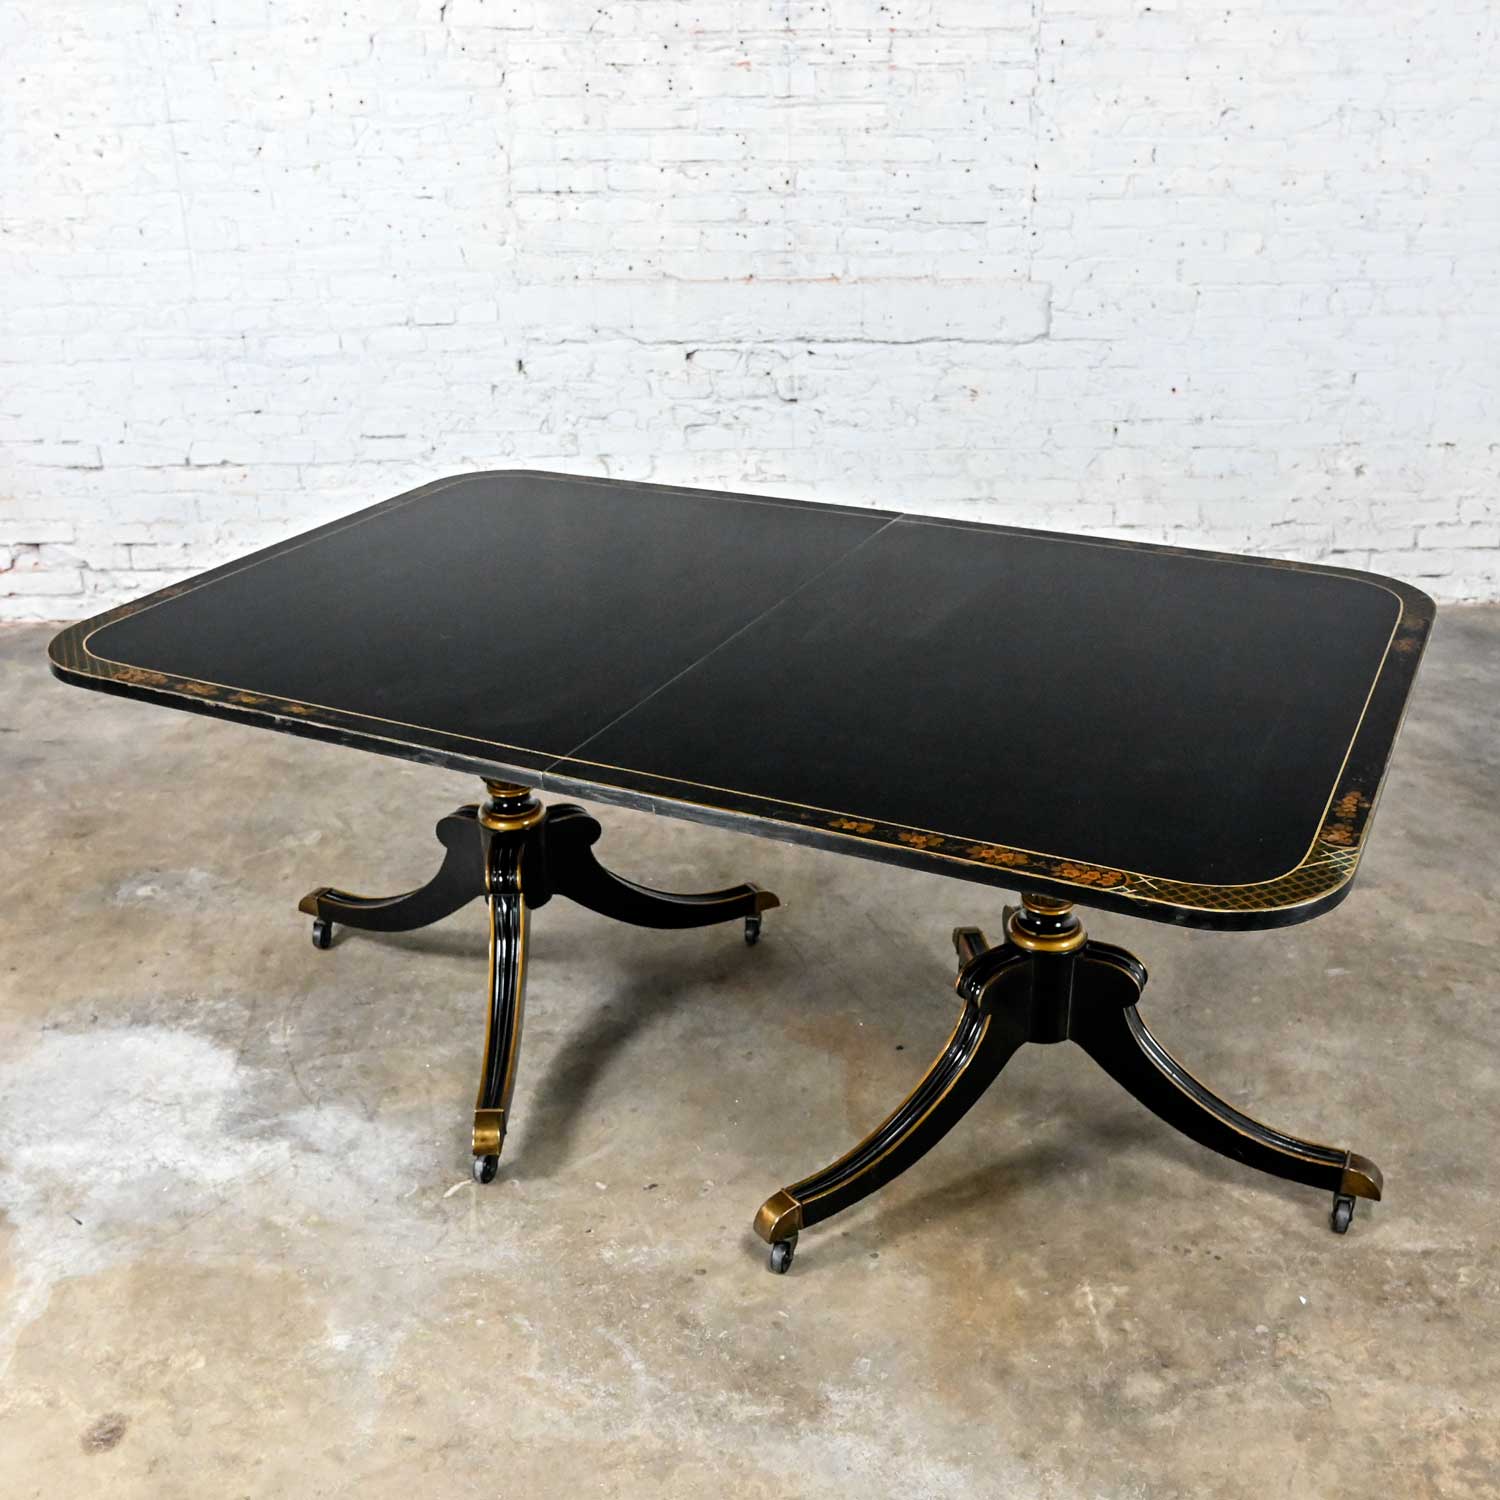 Fantastic vintage Chinoiserie Regency style Union National Inc. dining table with black painted & gilt edged top, 3 skirted apron leaves, & pineapple double pillar tripod base with casters. Painted design is signed on tabletop by J. Sheldon.